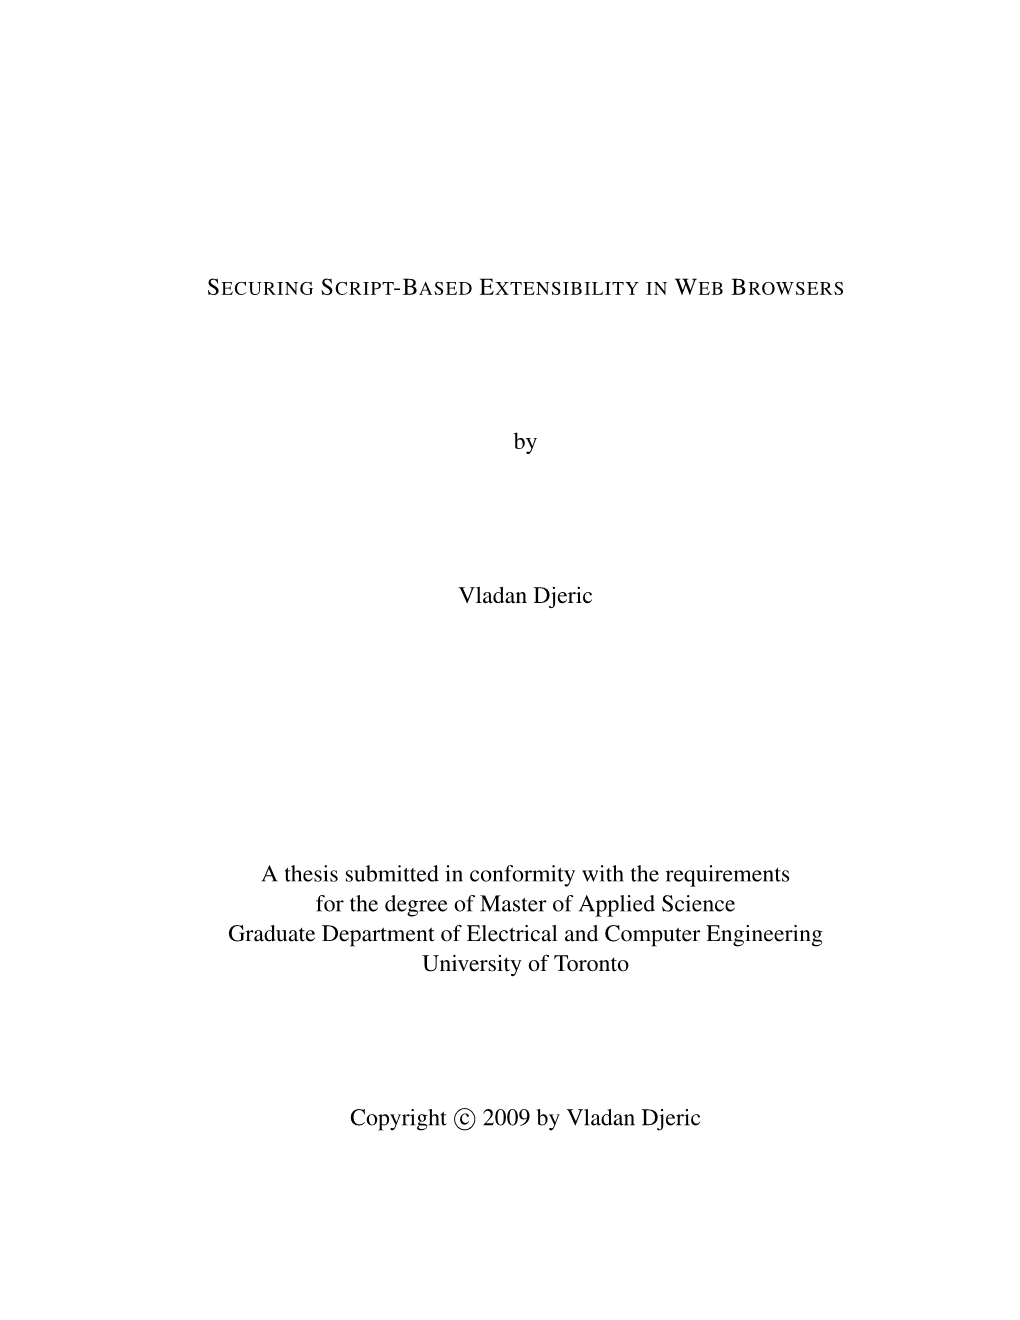 By Vladan Djeric a Thesis Submitted in Conformity with the Requirements For